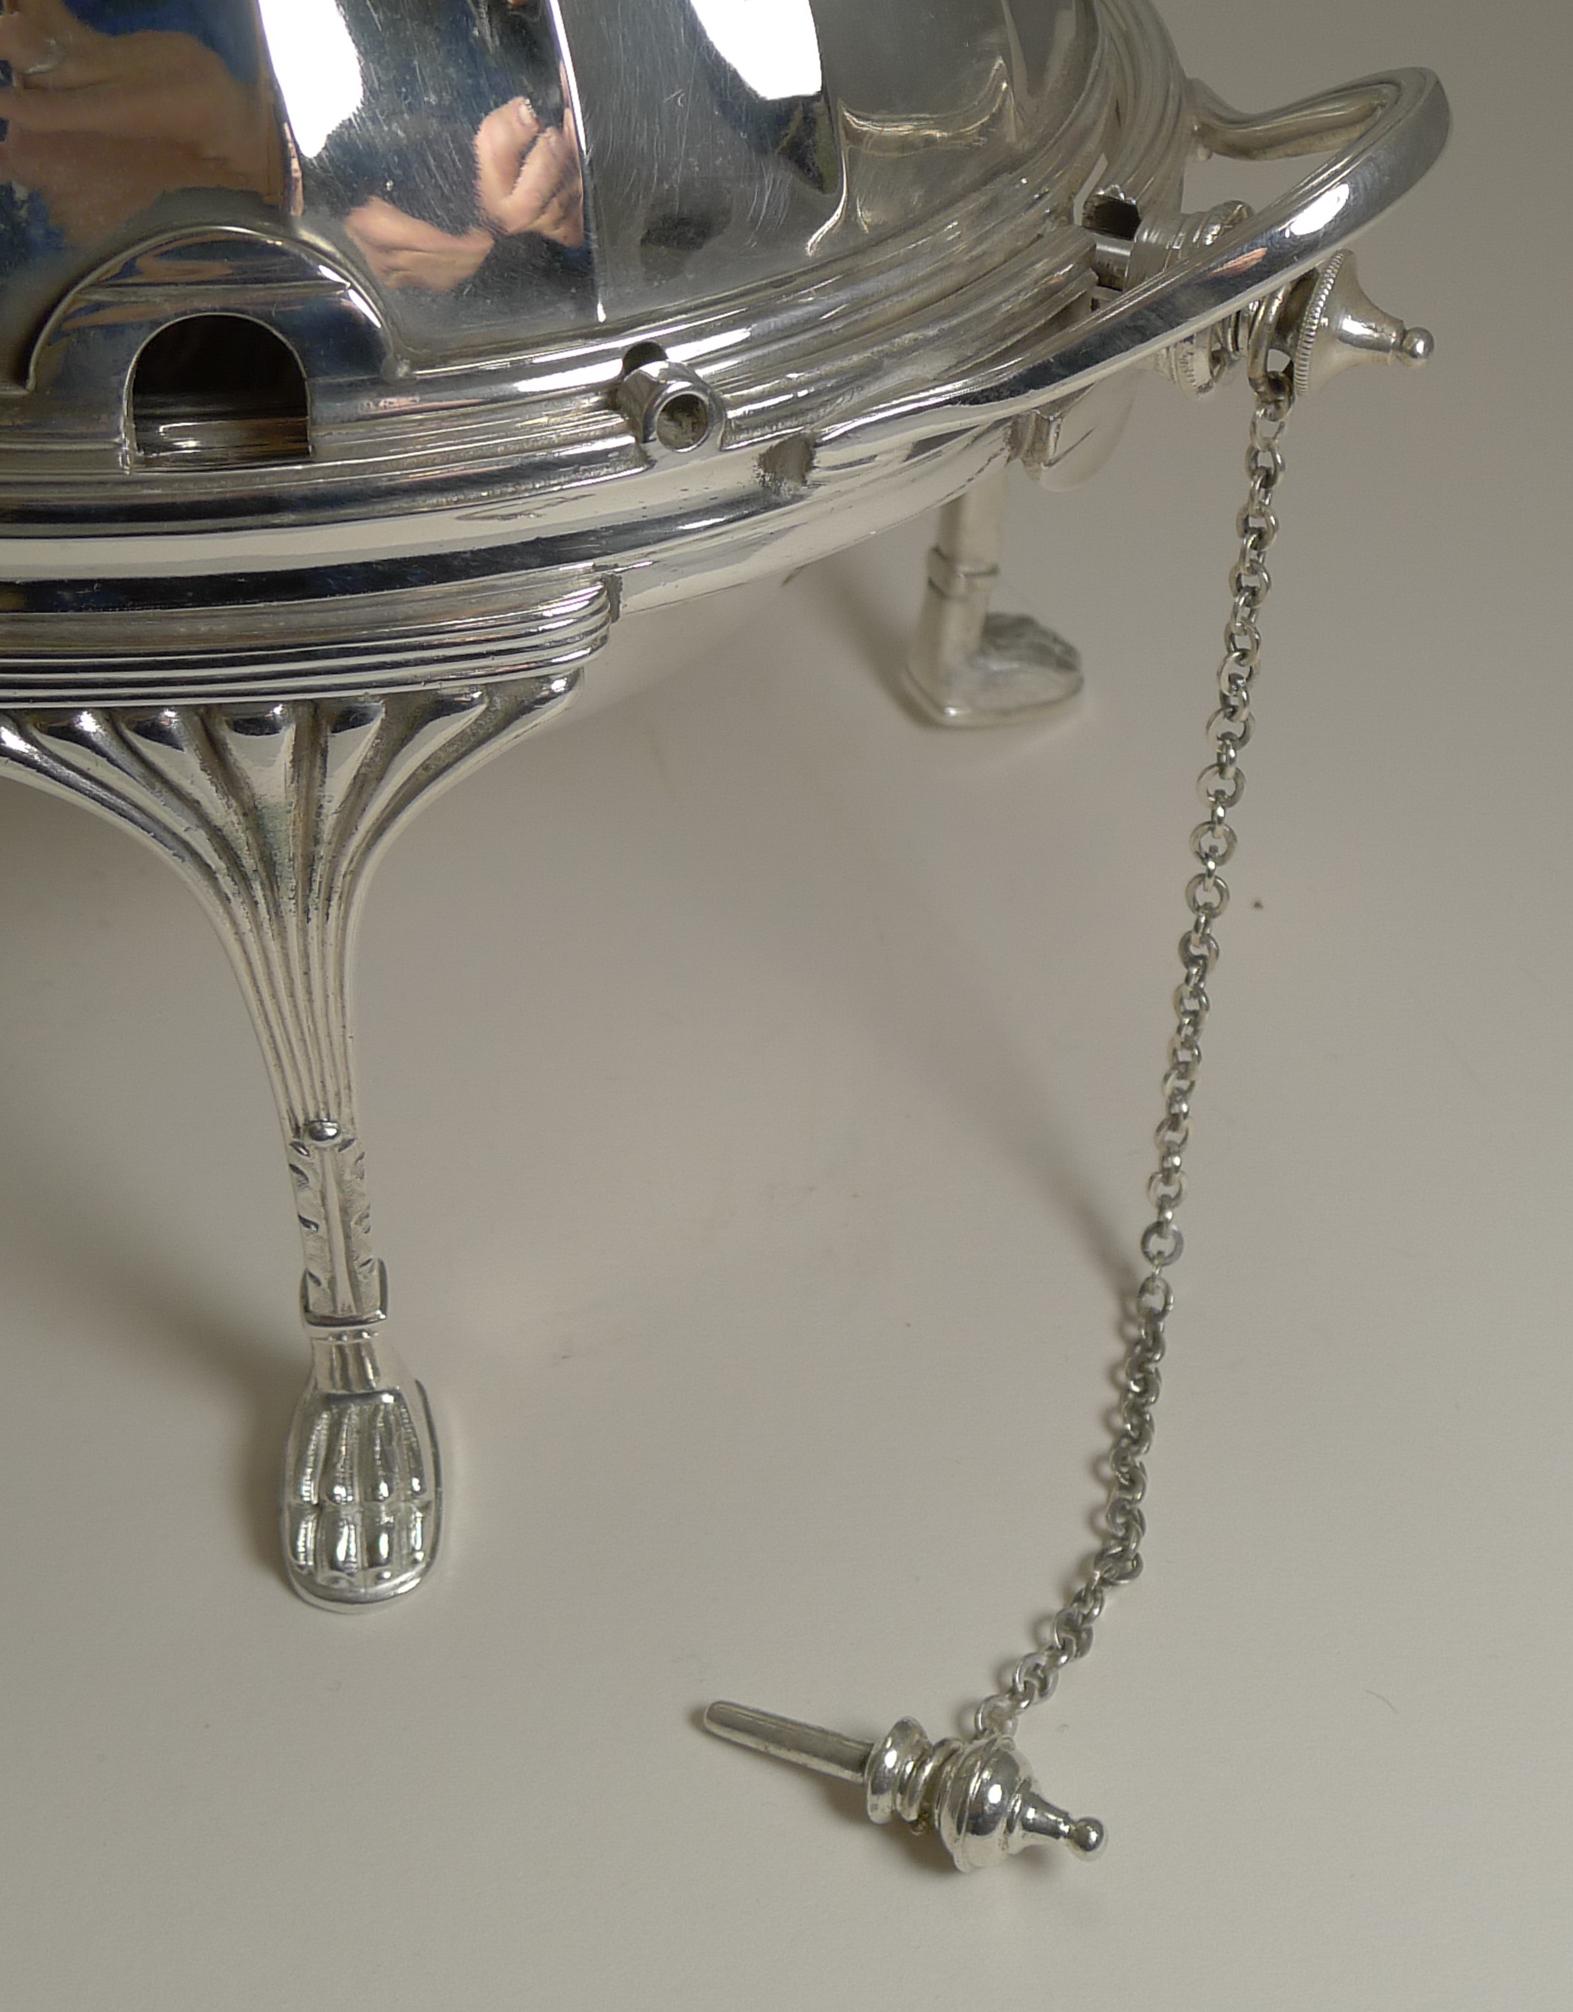 A smart and very elegant silver plated Breakfast / Chafing dish by the top-notch silversmith, Mappin and Webb of London and Sheffield; fully marked on the underside.

The dish stand on four very grand legs with paw feet and there is a key on a